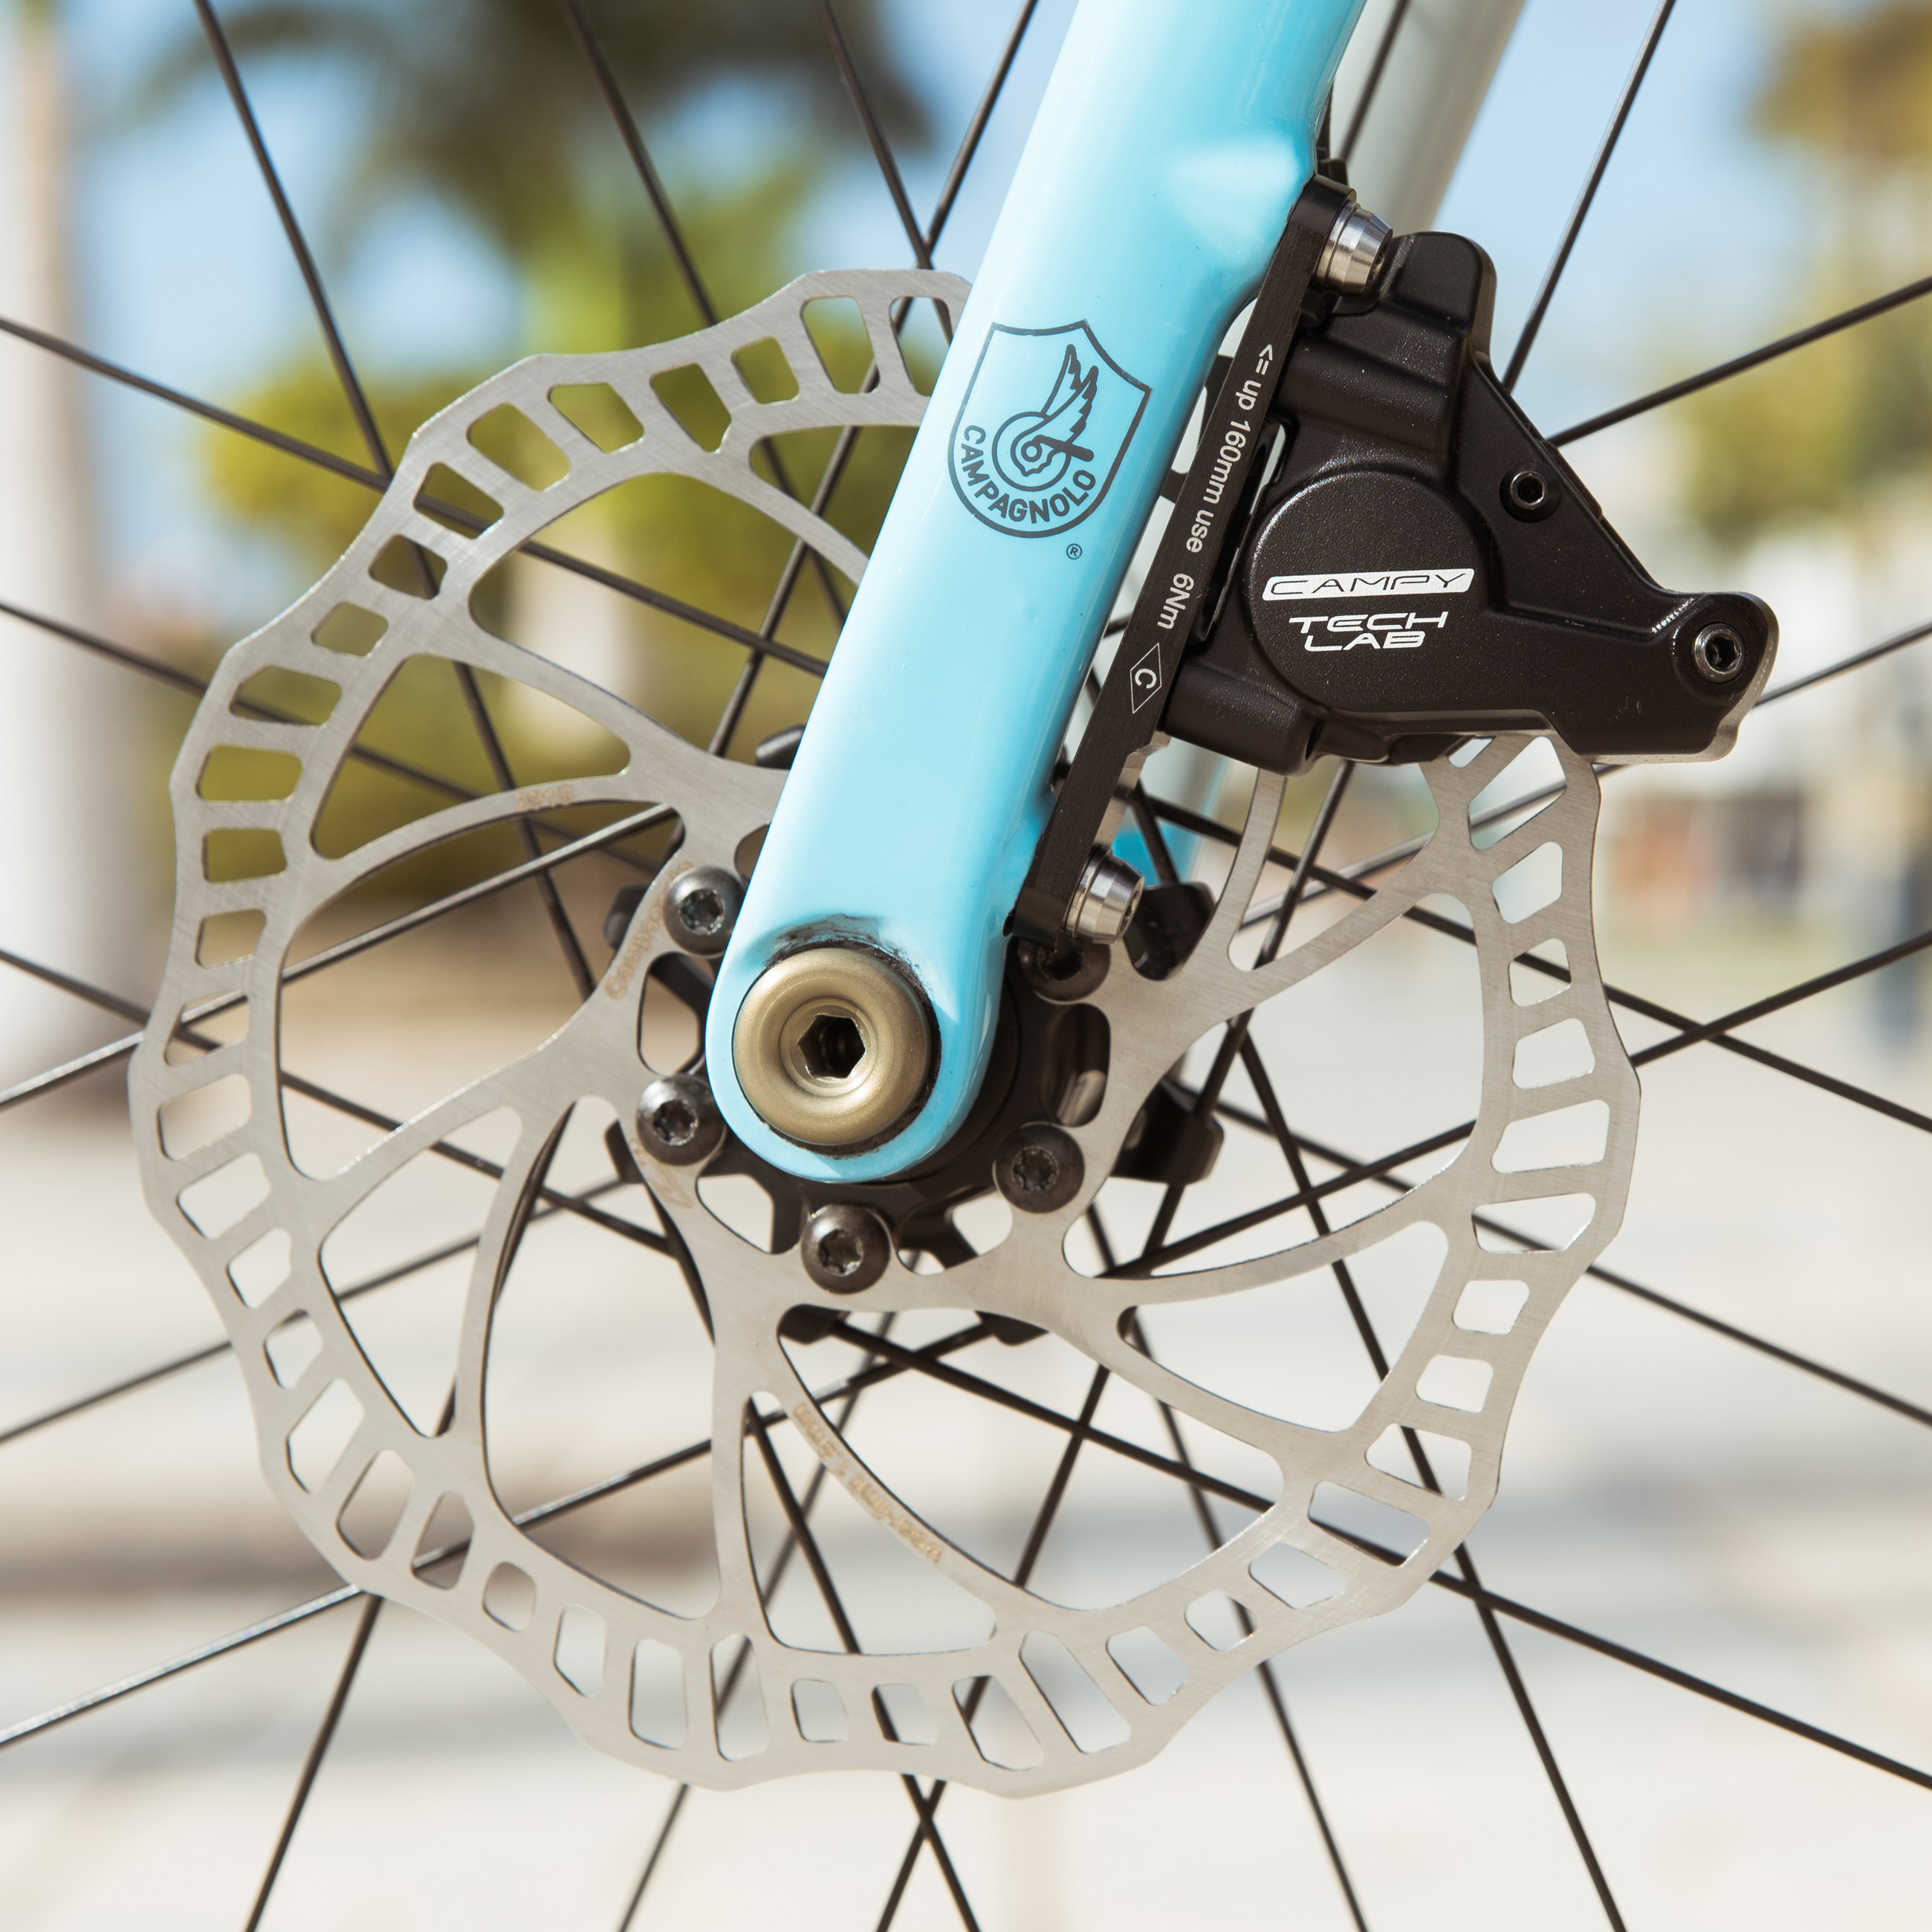 Campagnolo disc brakes previewed as team-only Campy Tech Lab development project